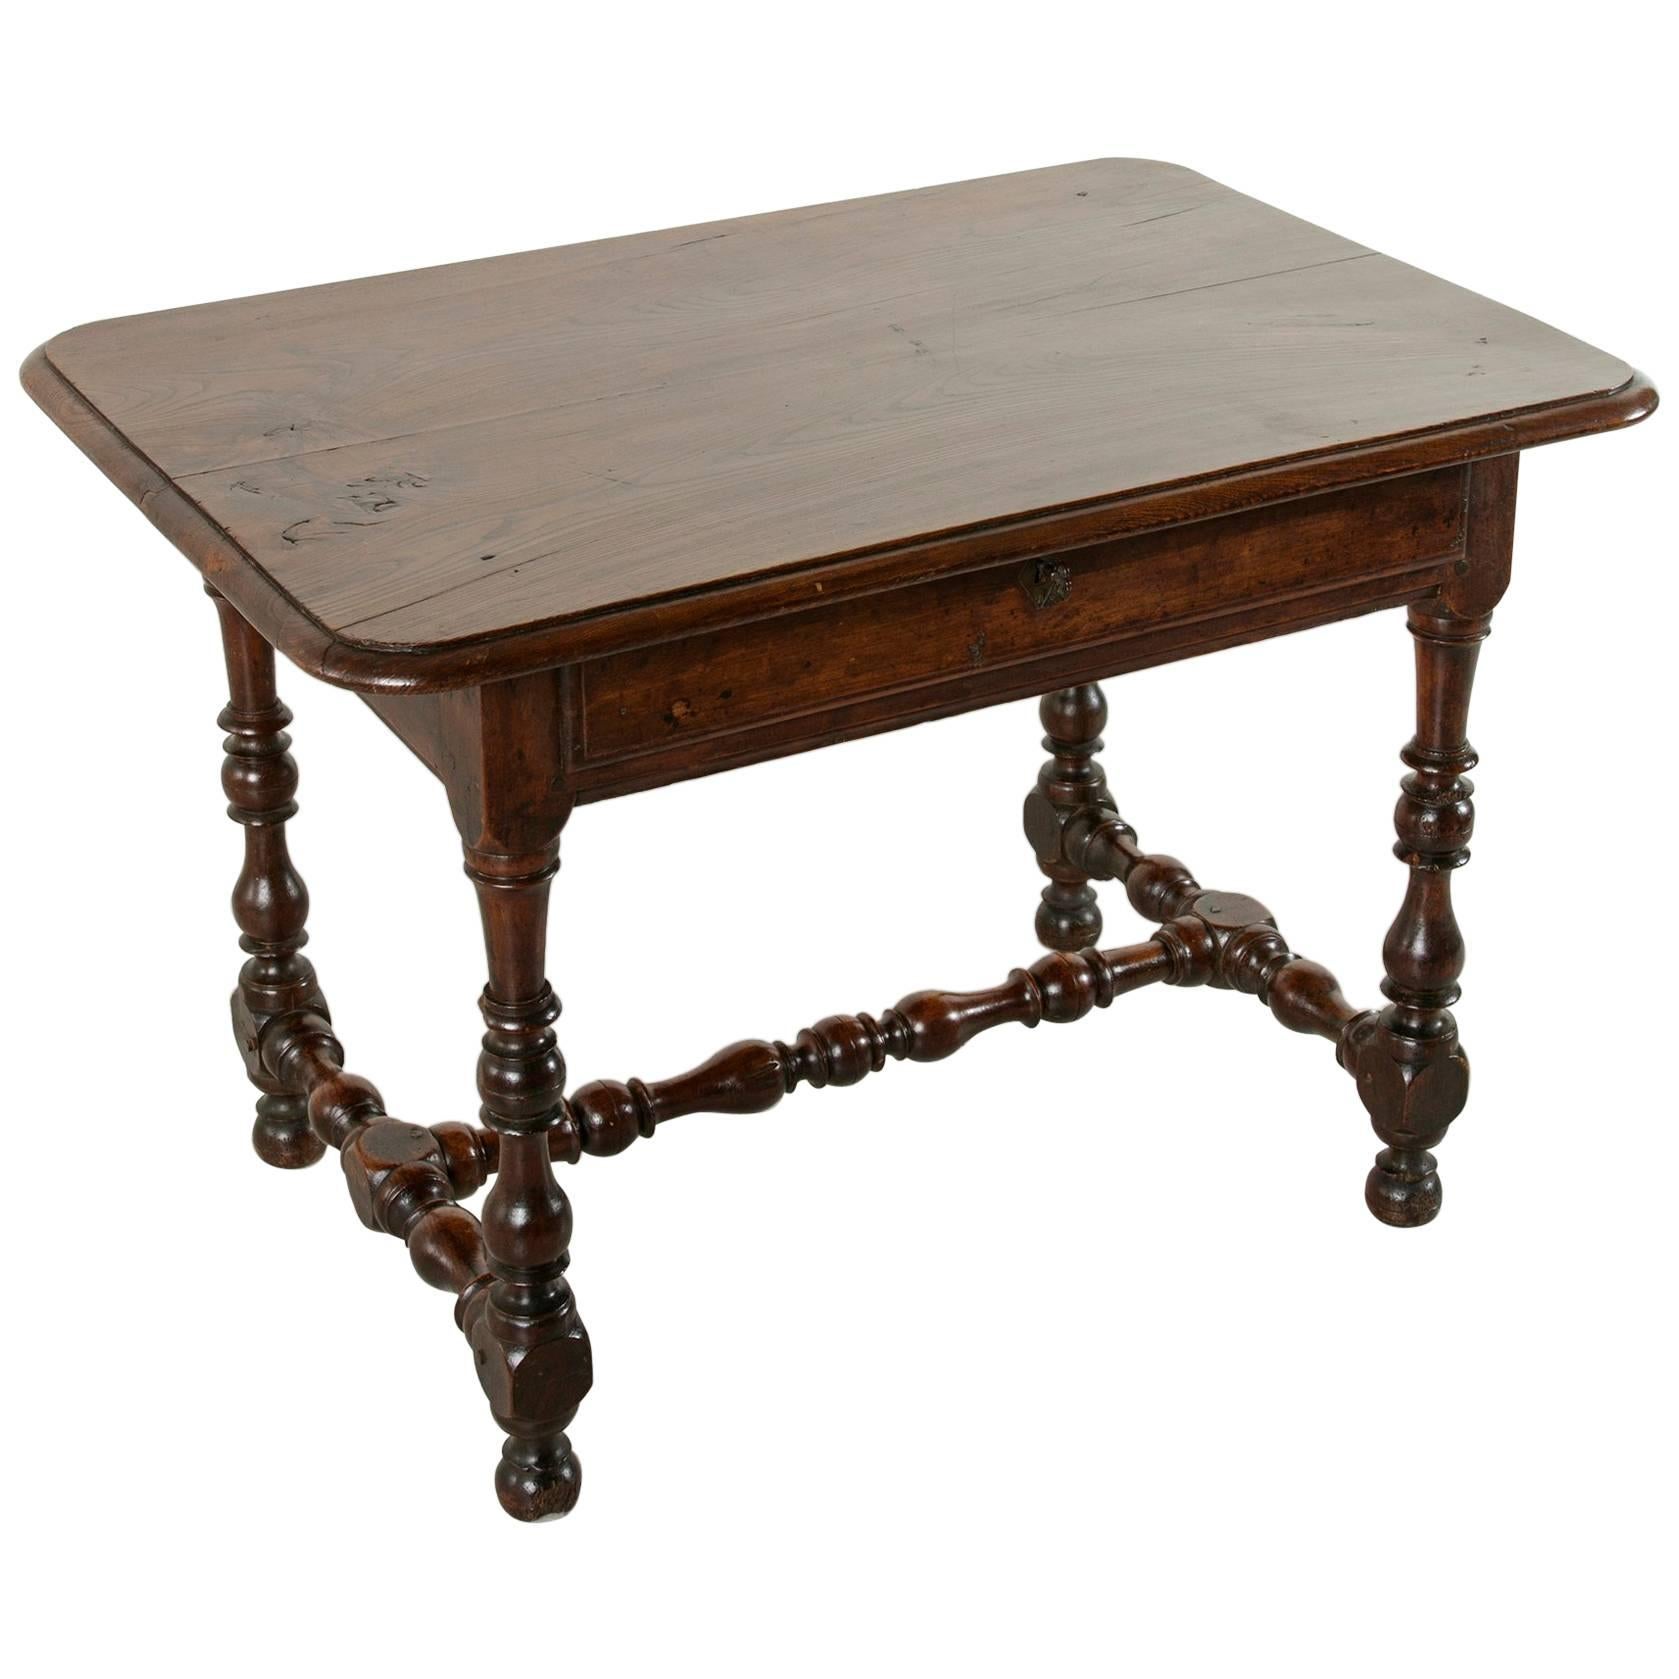 18th Century Louis XIII Style Oak Table with Turned Legs and Single Drawer